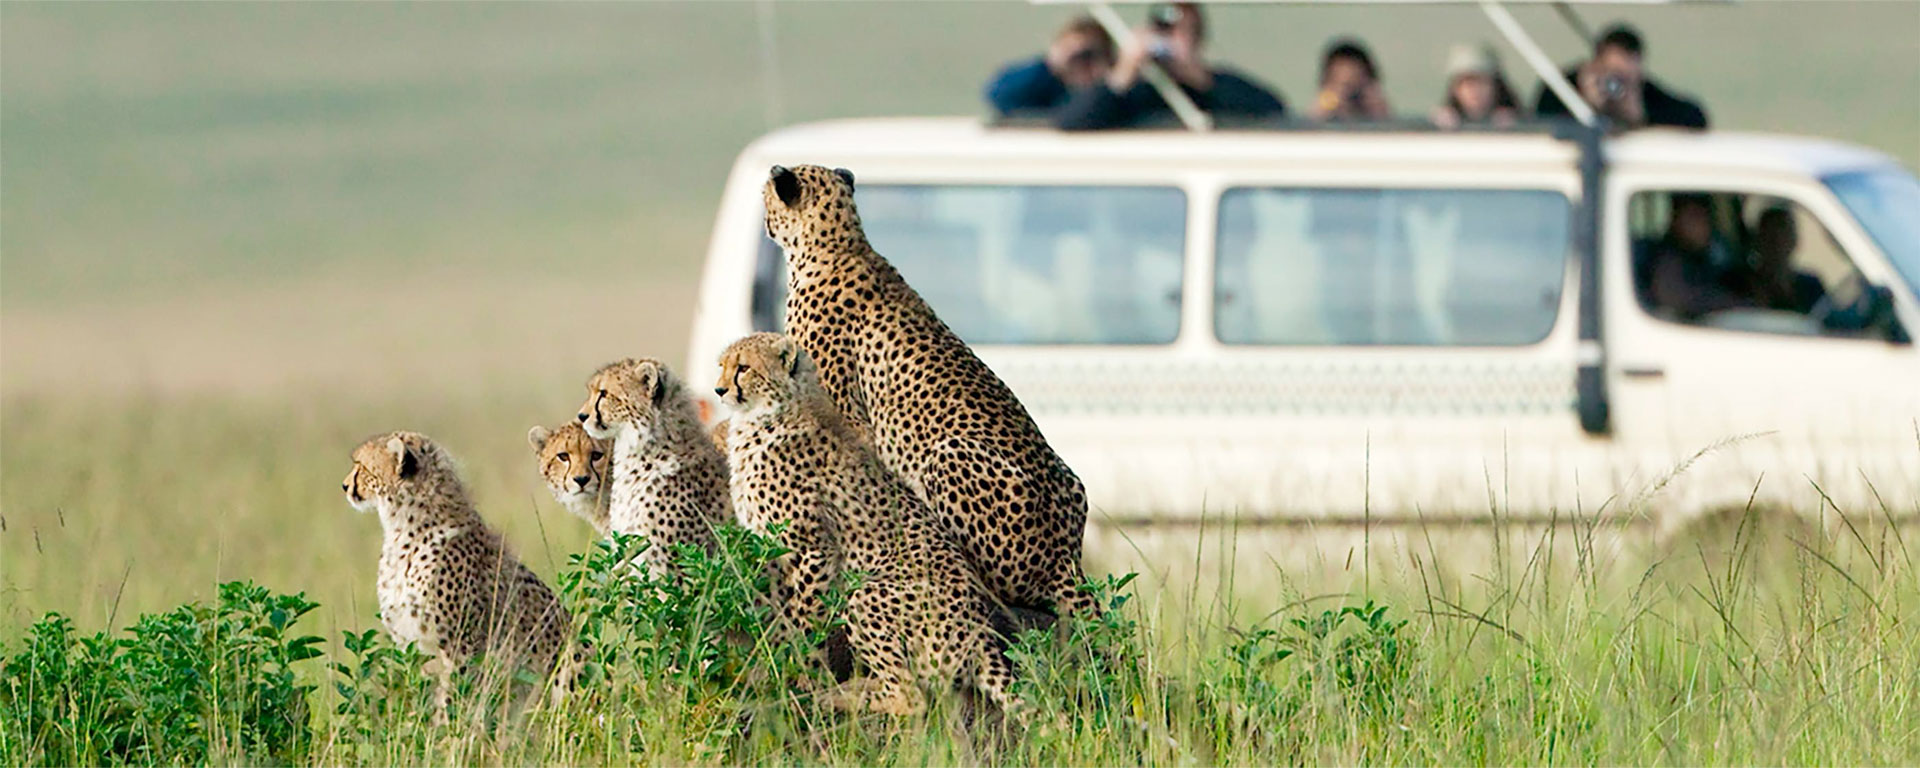 On safari viewing family of cheetahs in Africa.